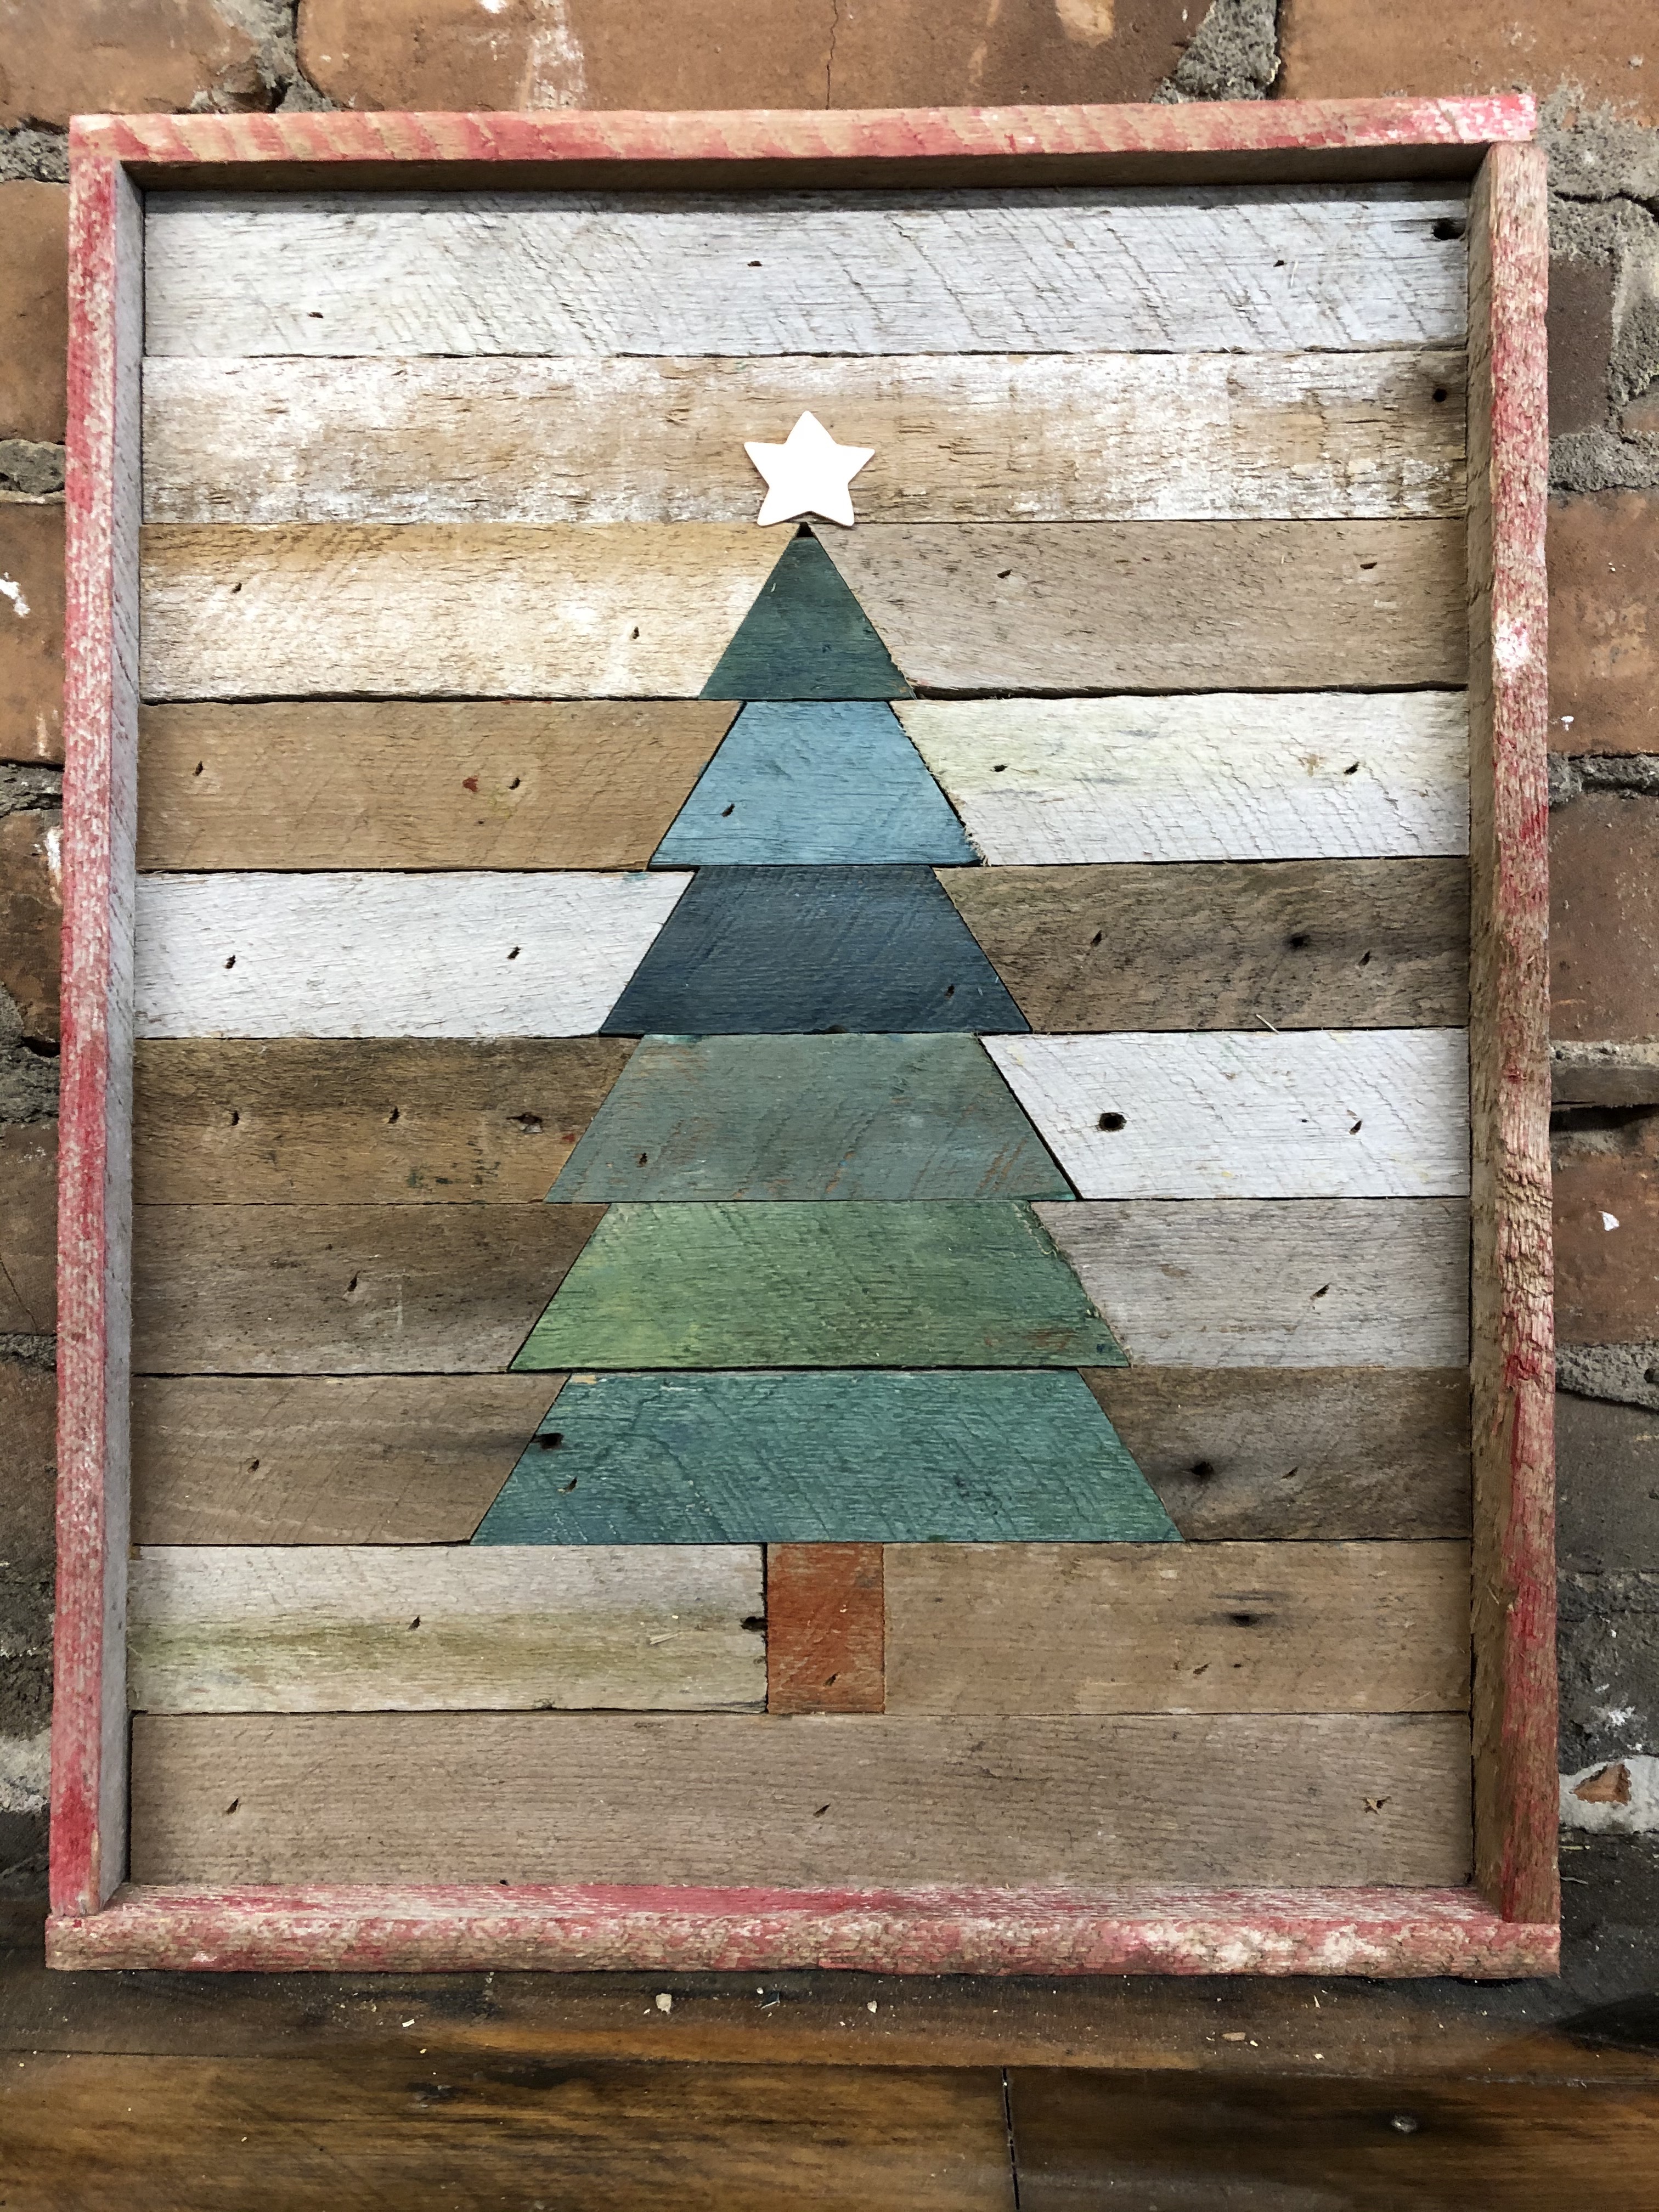 Event image BARN QUILT - TREE